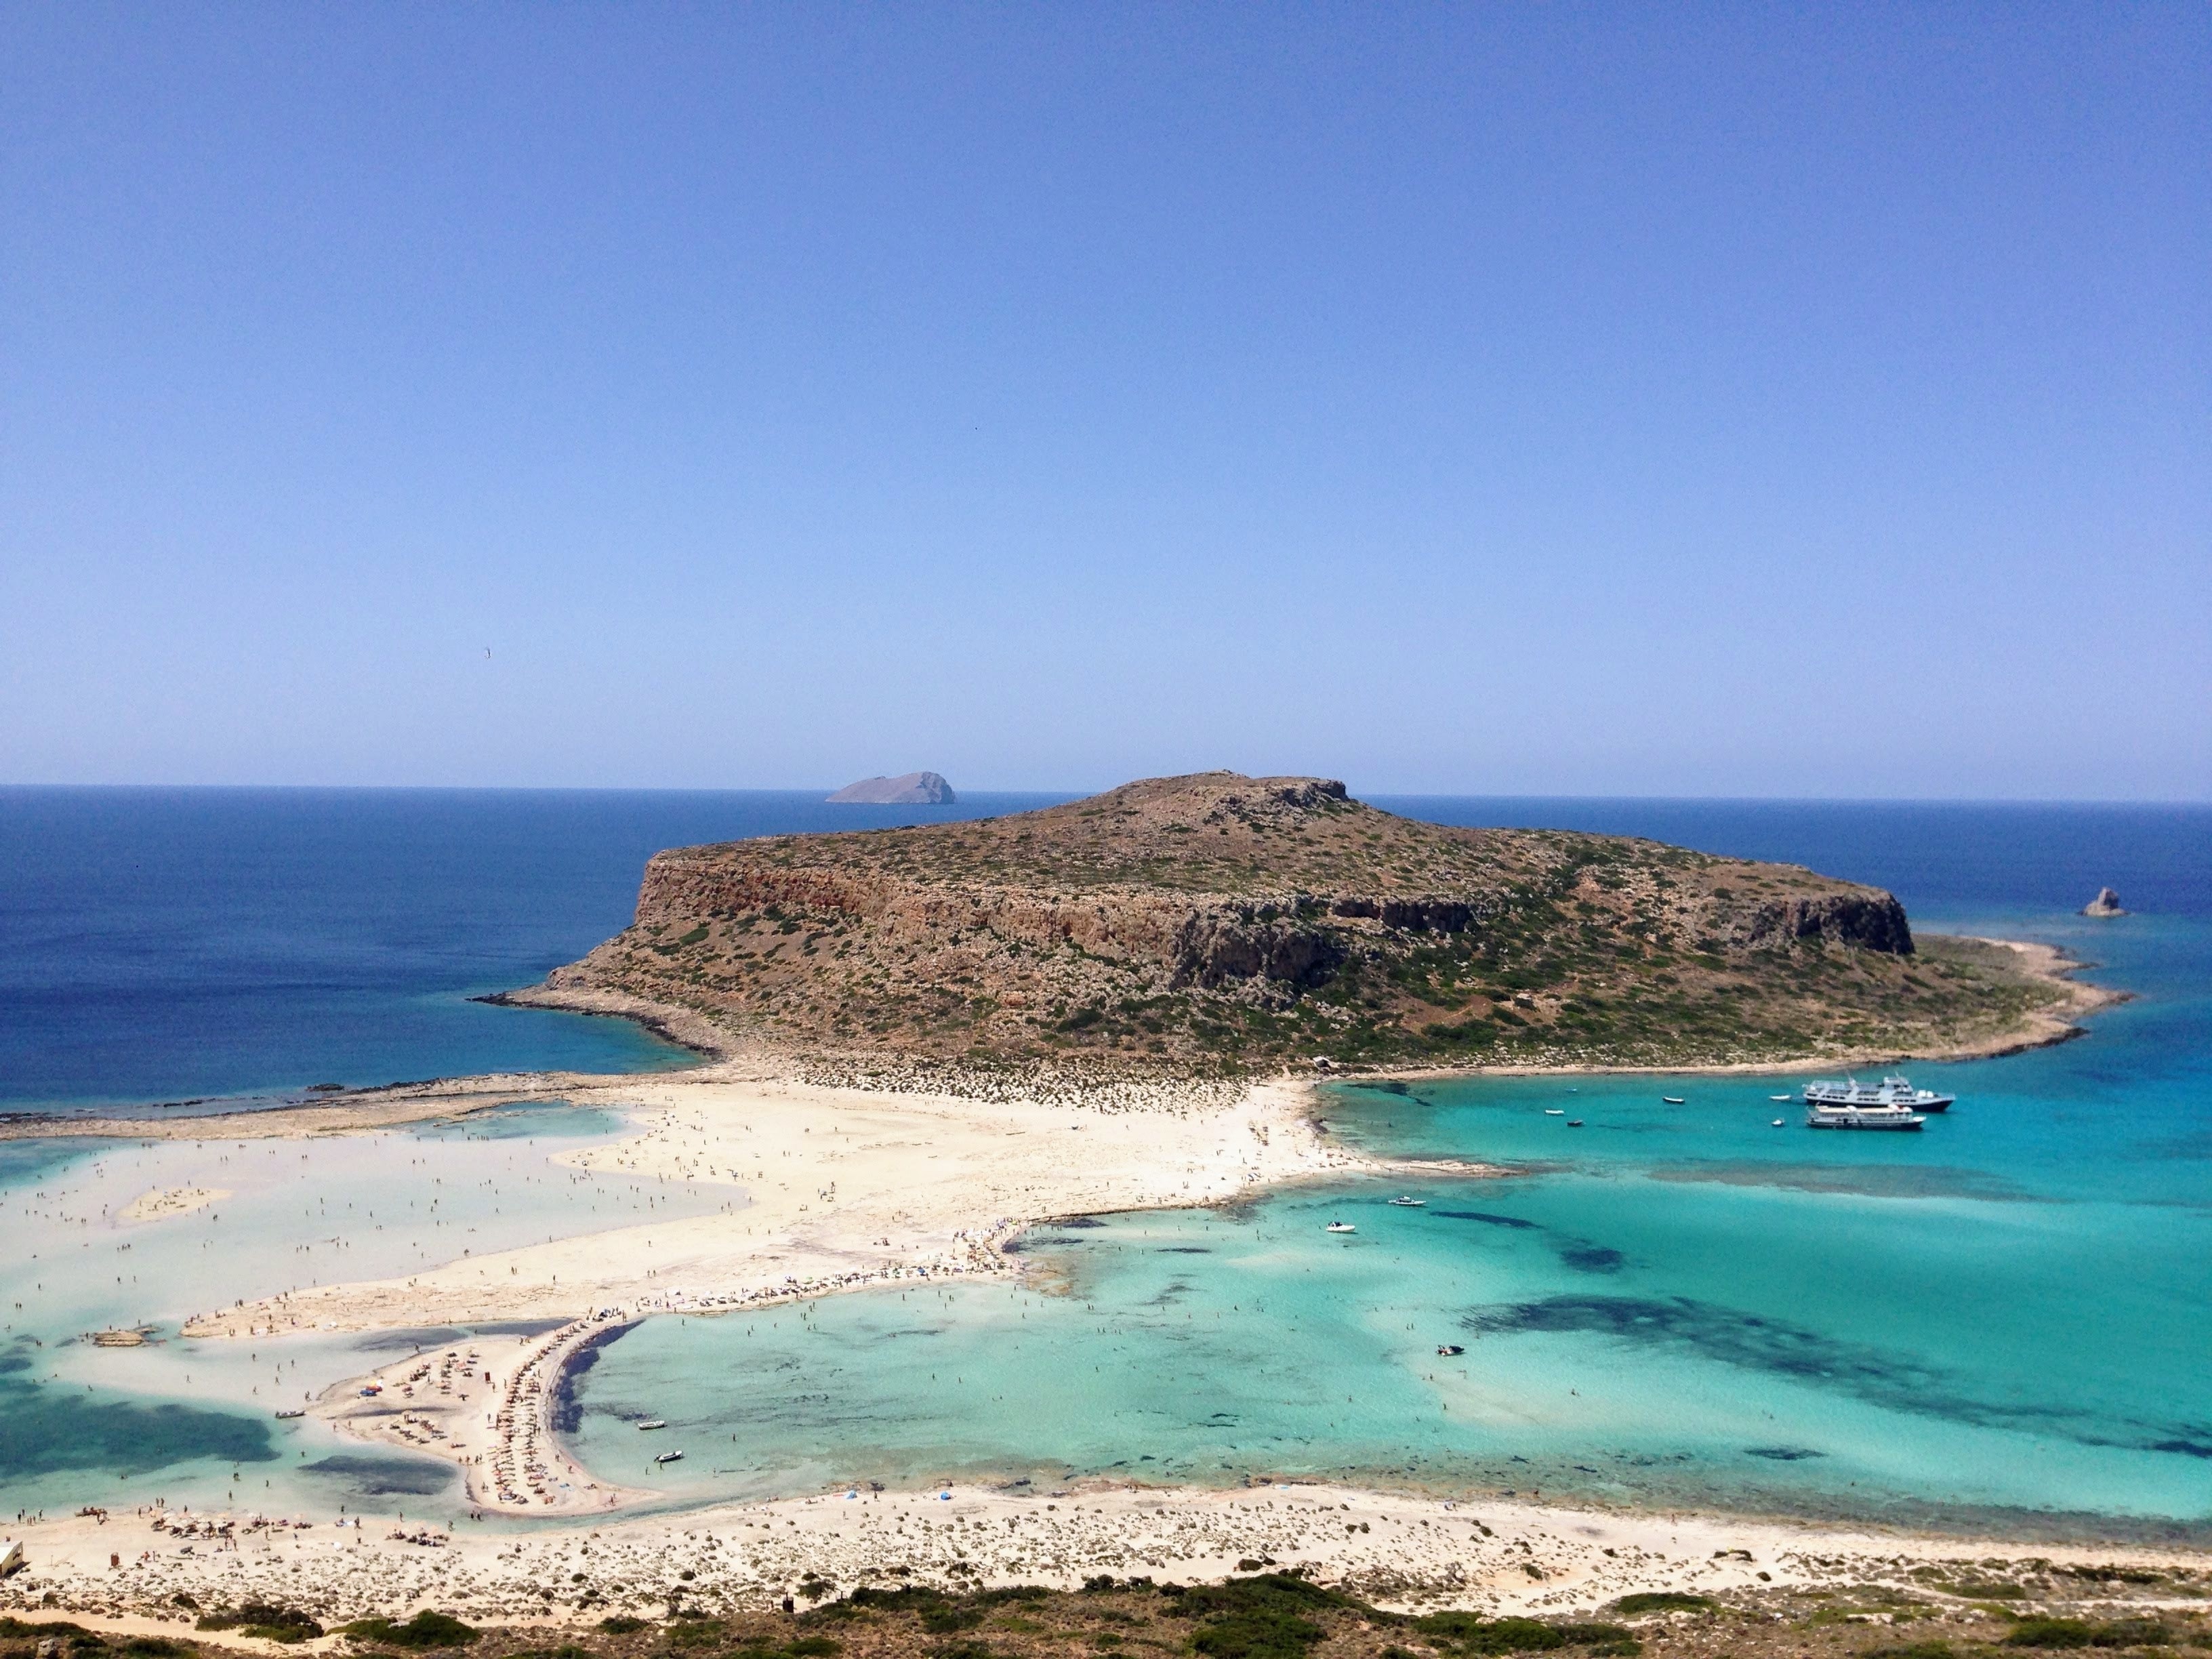 Balos Lagoon on the island of Crete is one of its many hidden treasures! #ReDiscover #crete #greece